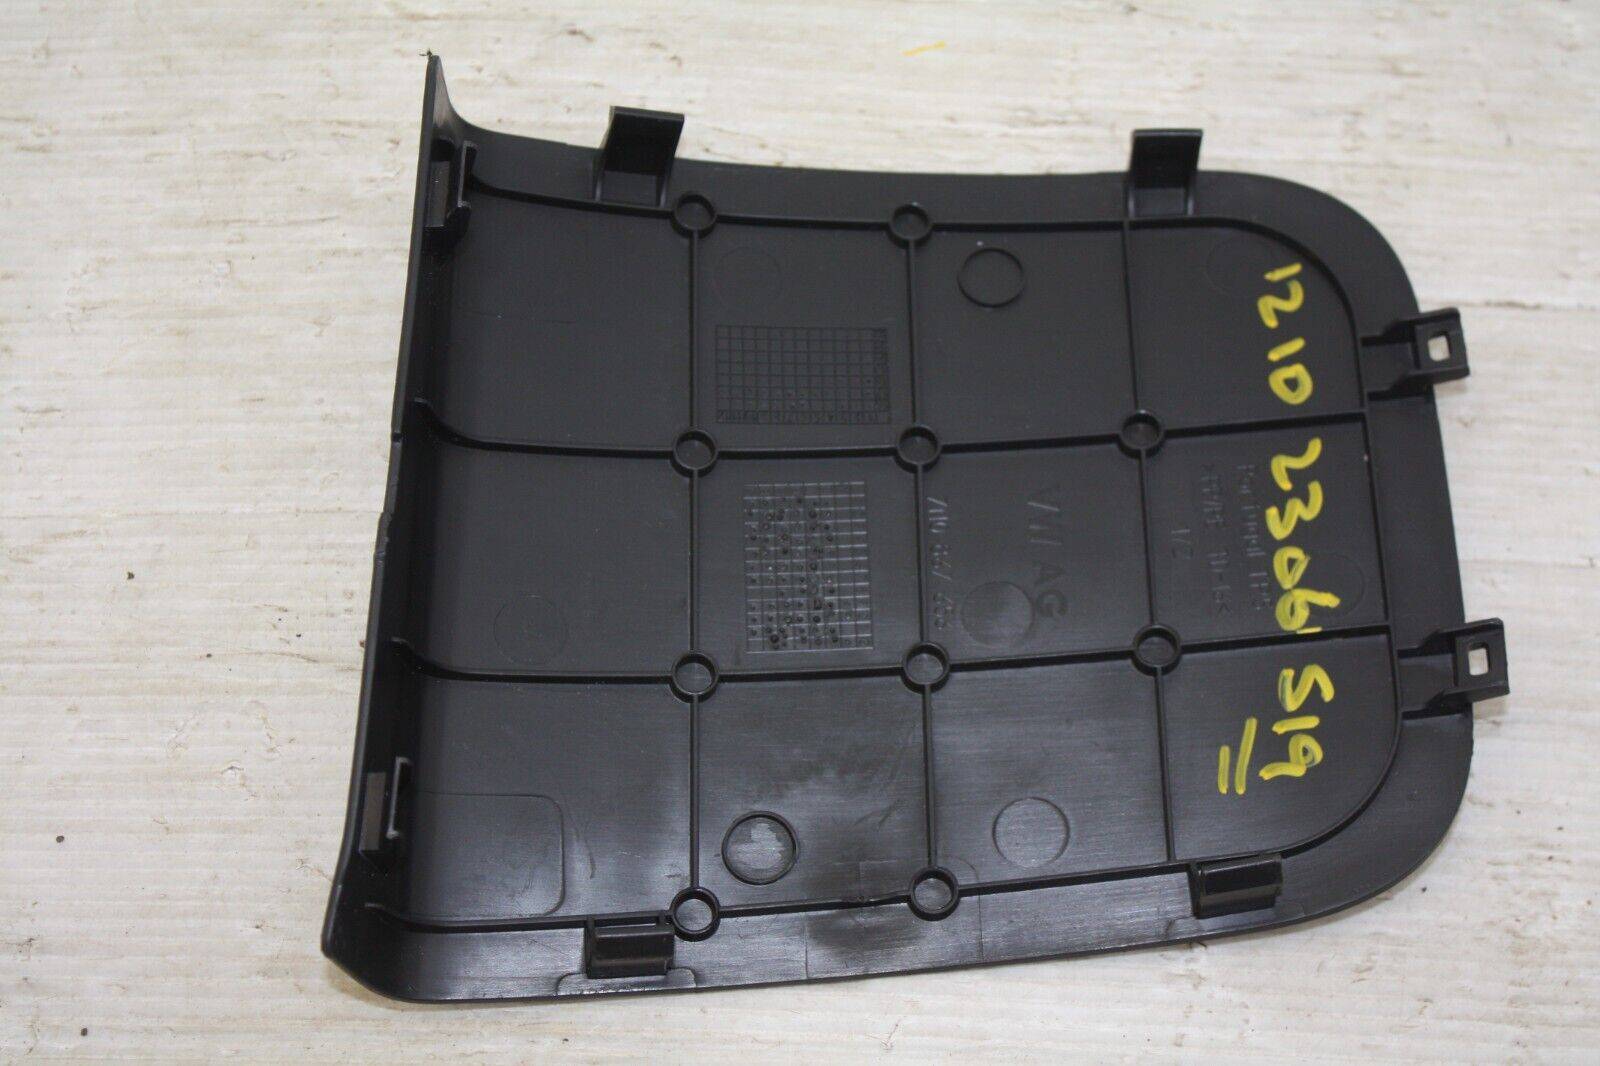 VW-Sharan-Rear-Right-Inspection-Cover-Tailgate-Trim-2010-TO-2015-7N0867656-176279124804-8